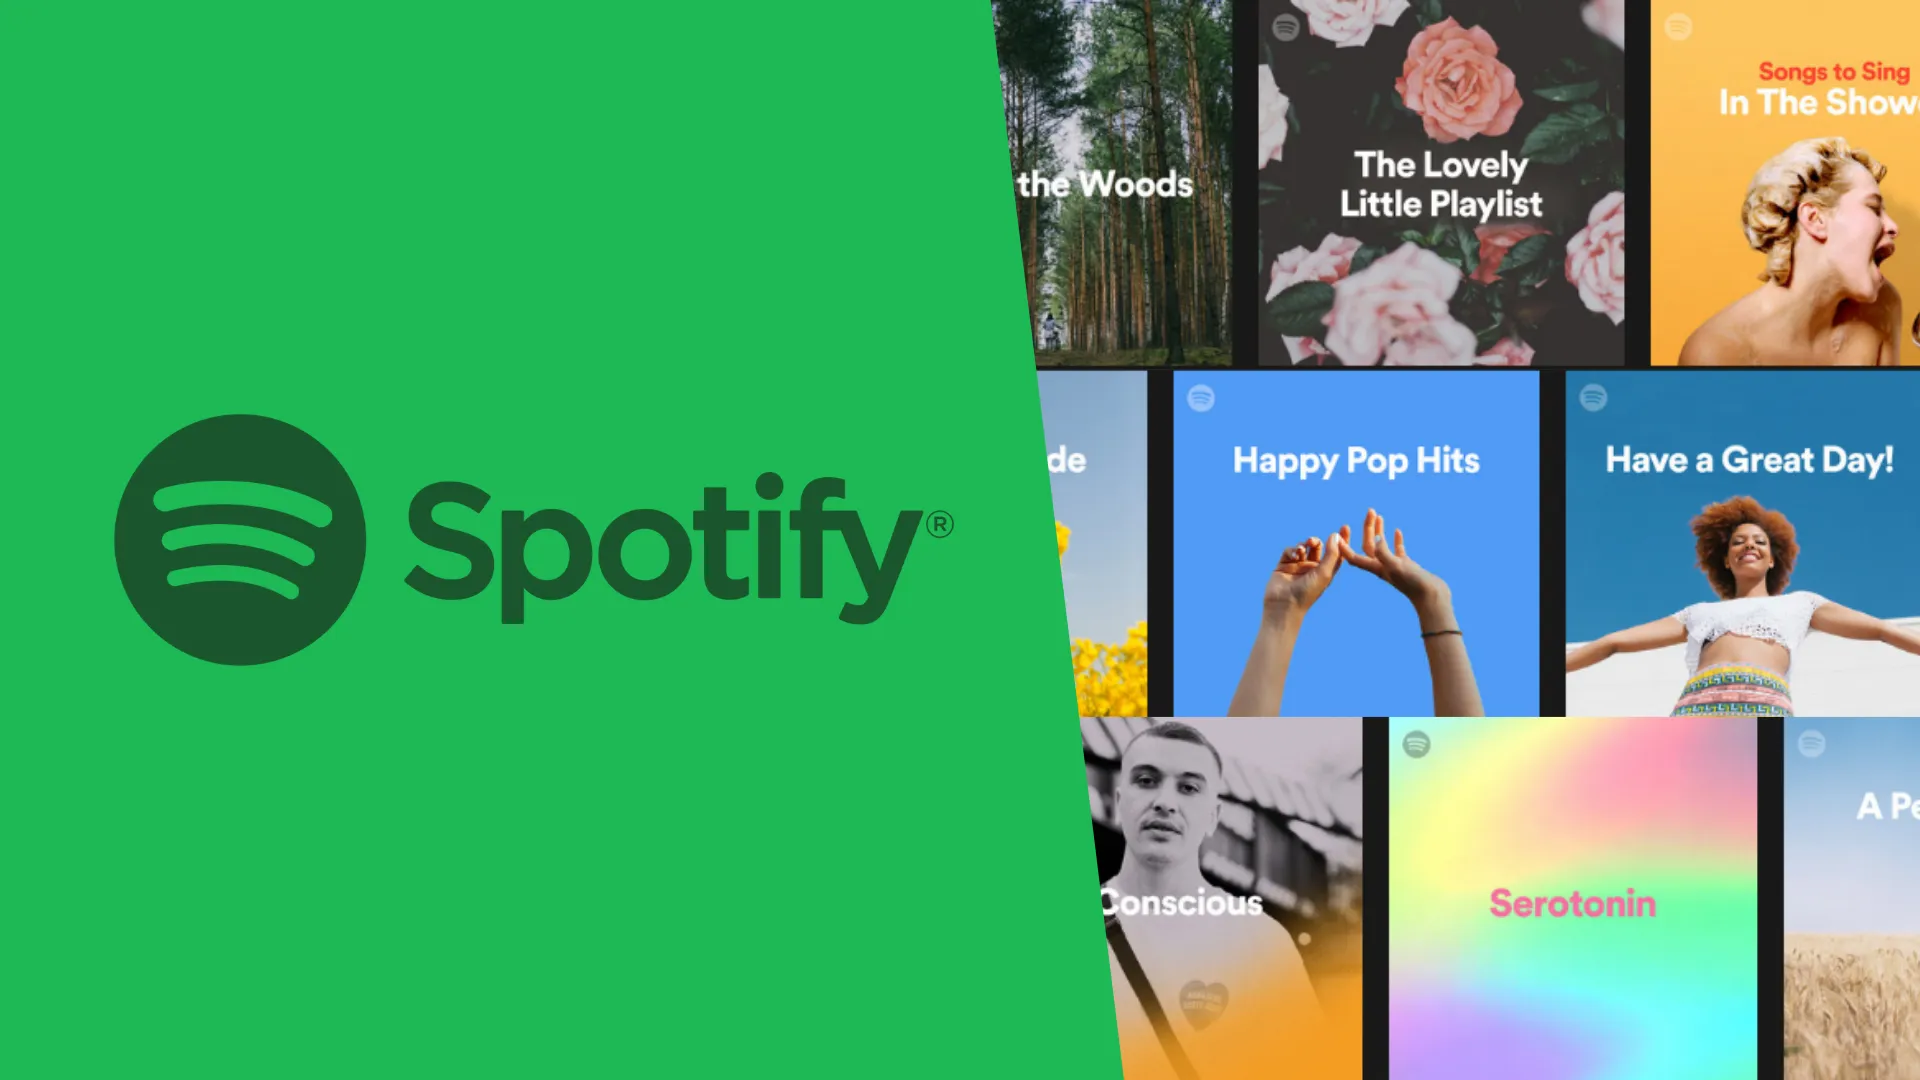 spotify spotle answer today